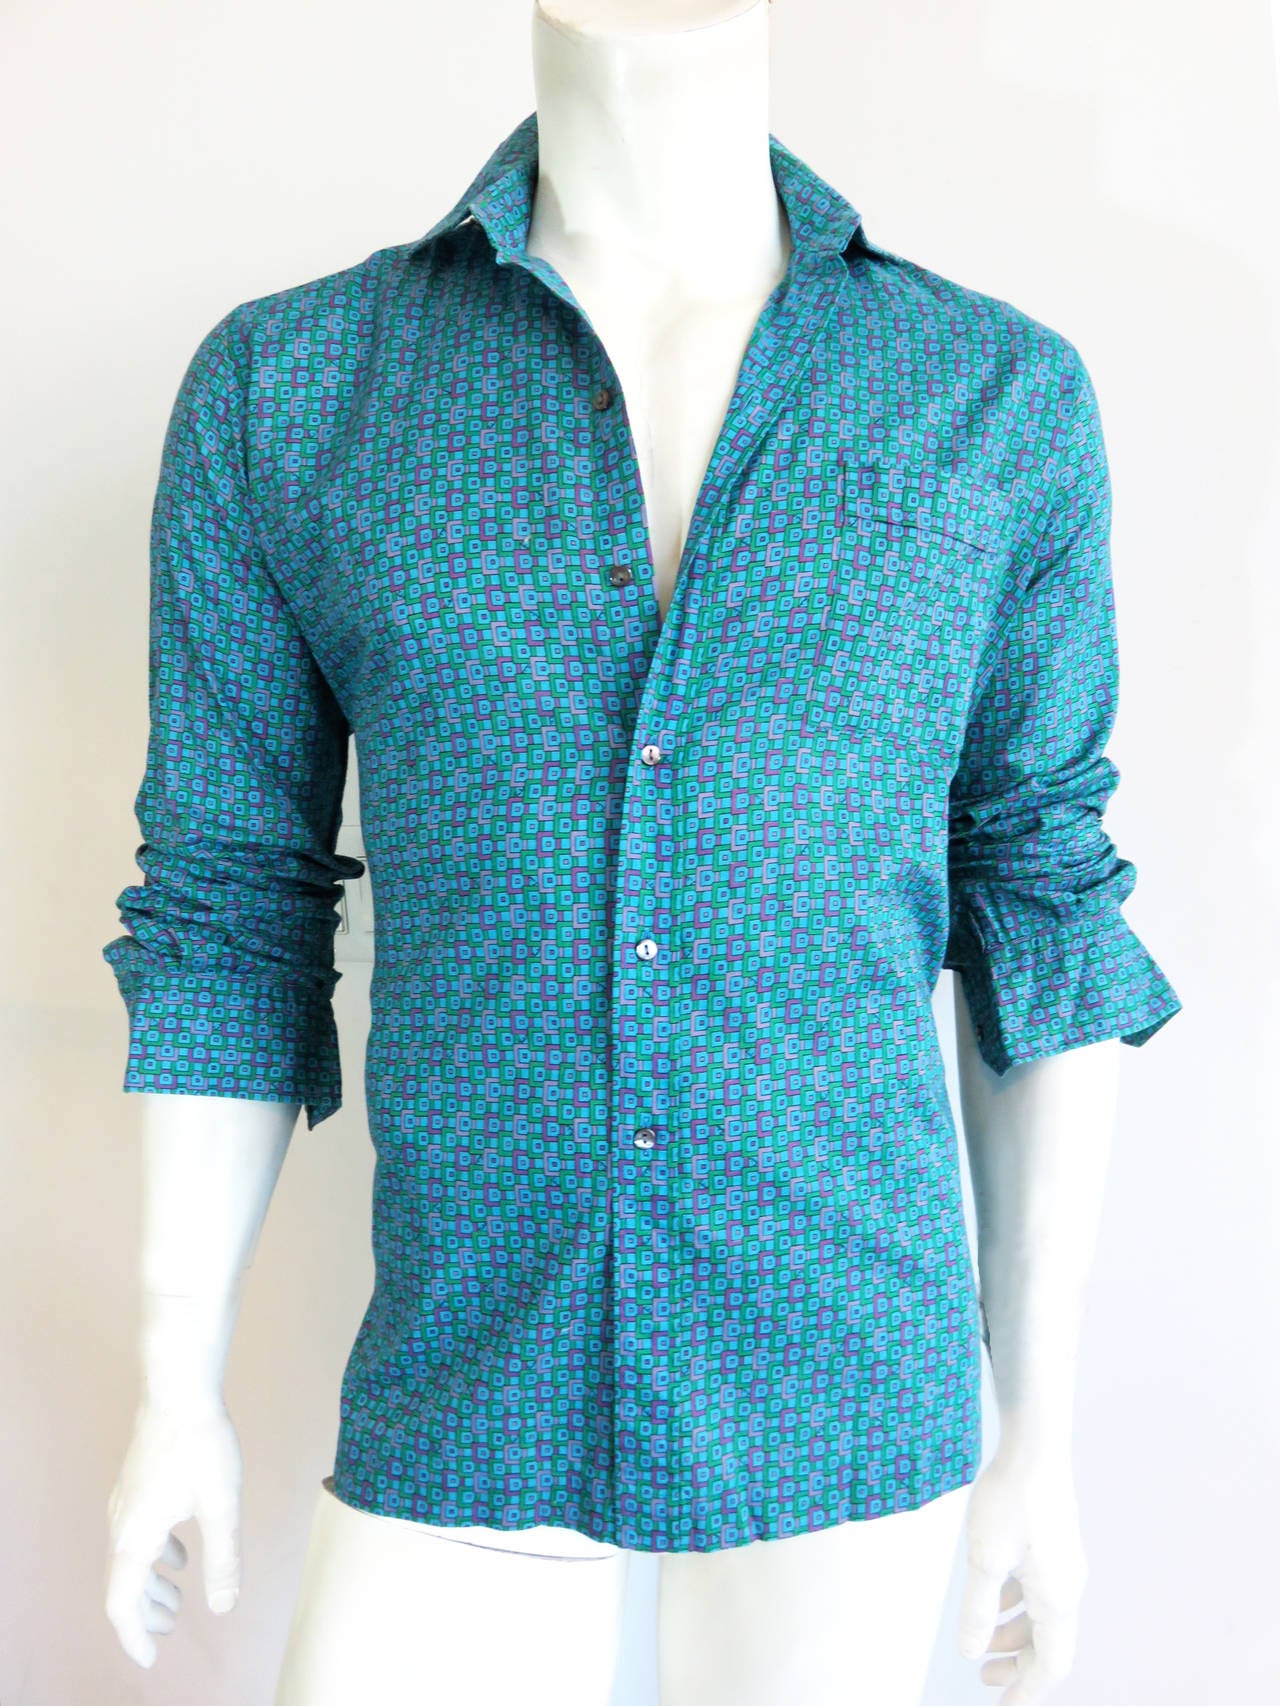 Excellent condition, 1970's EMILIO PUCCI Men's signed squares printed woven shirt.

Geometric square print with mini 'Emilio' signatures throughout.

Made in Italy, as labeled.

Smoked pearl button down closures.

*MEASUREMENTS*

Vintage